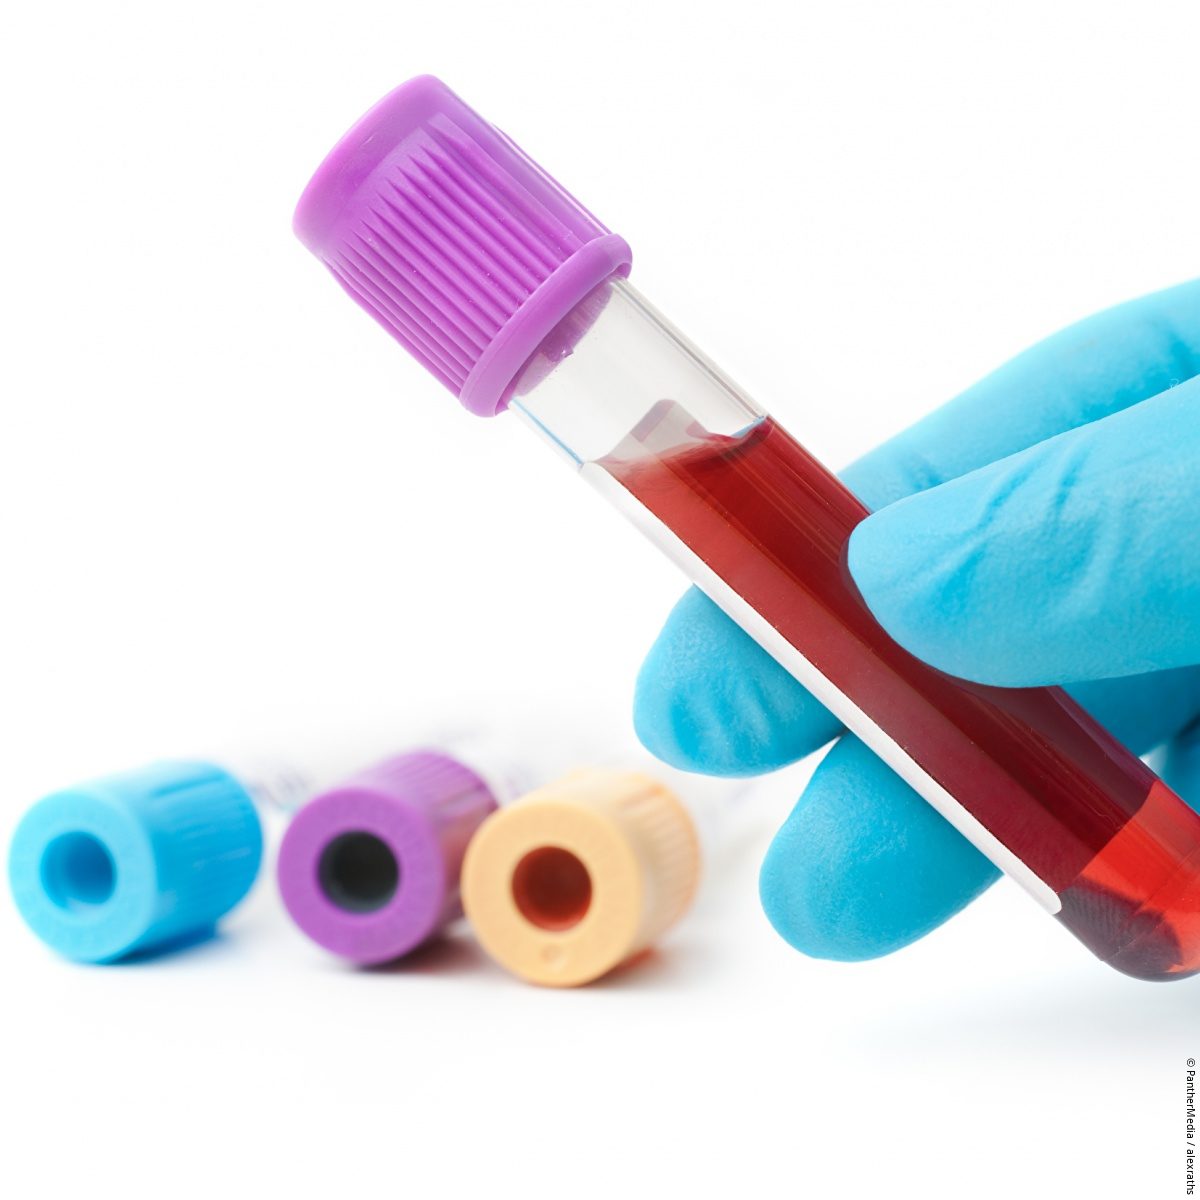 Blood test detects over 50 cancer types